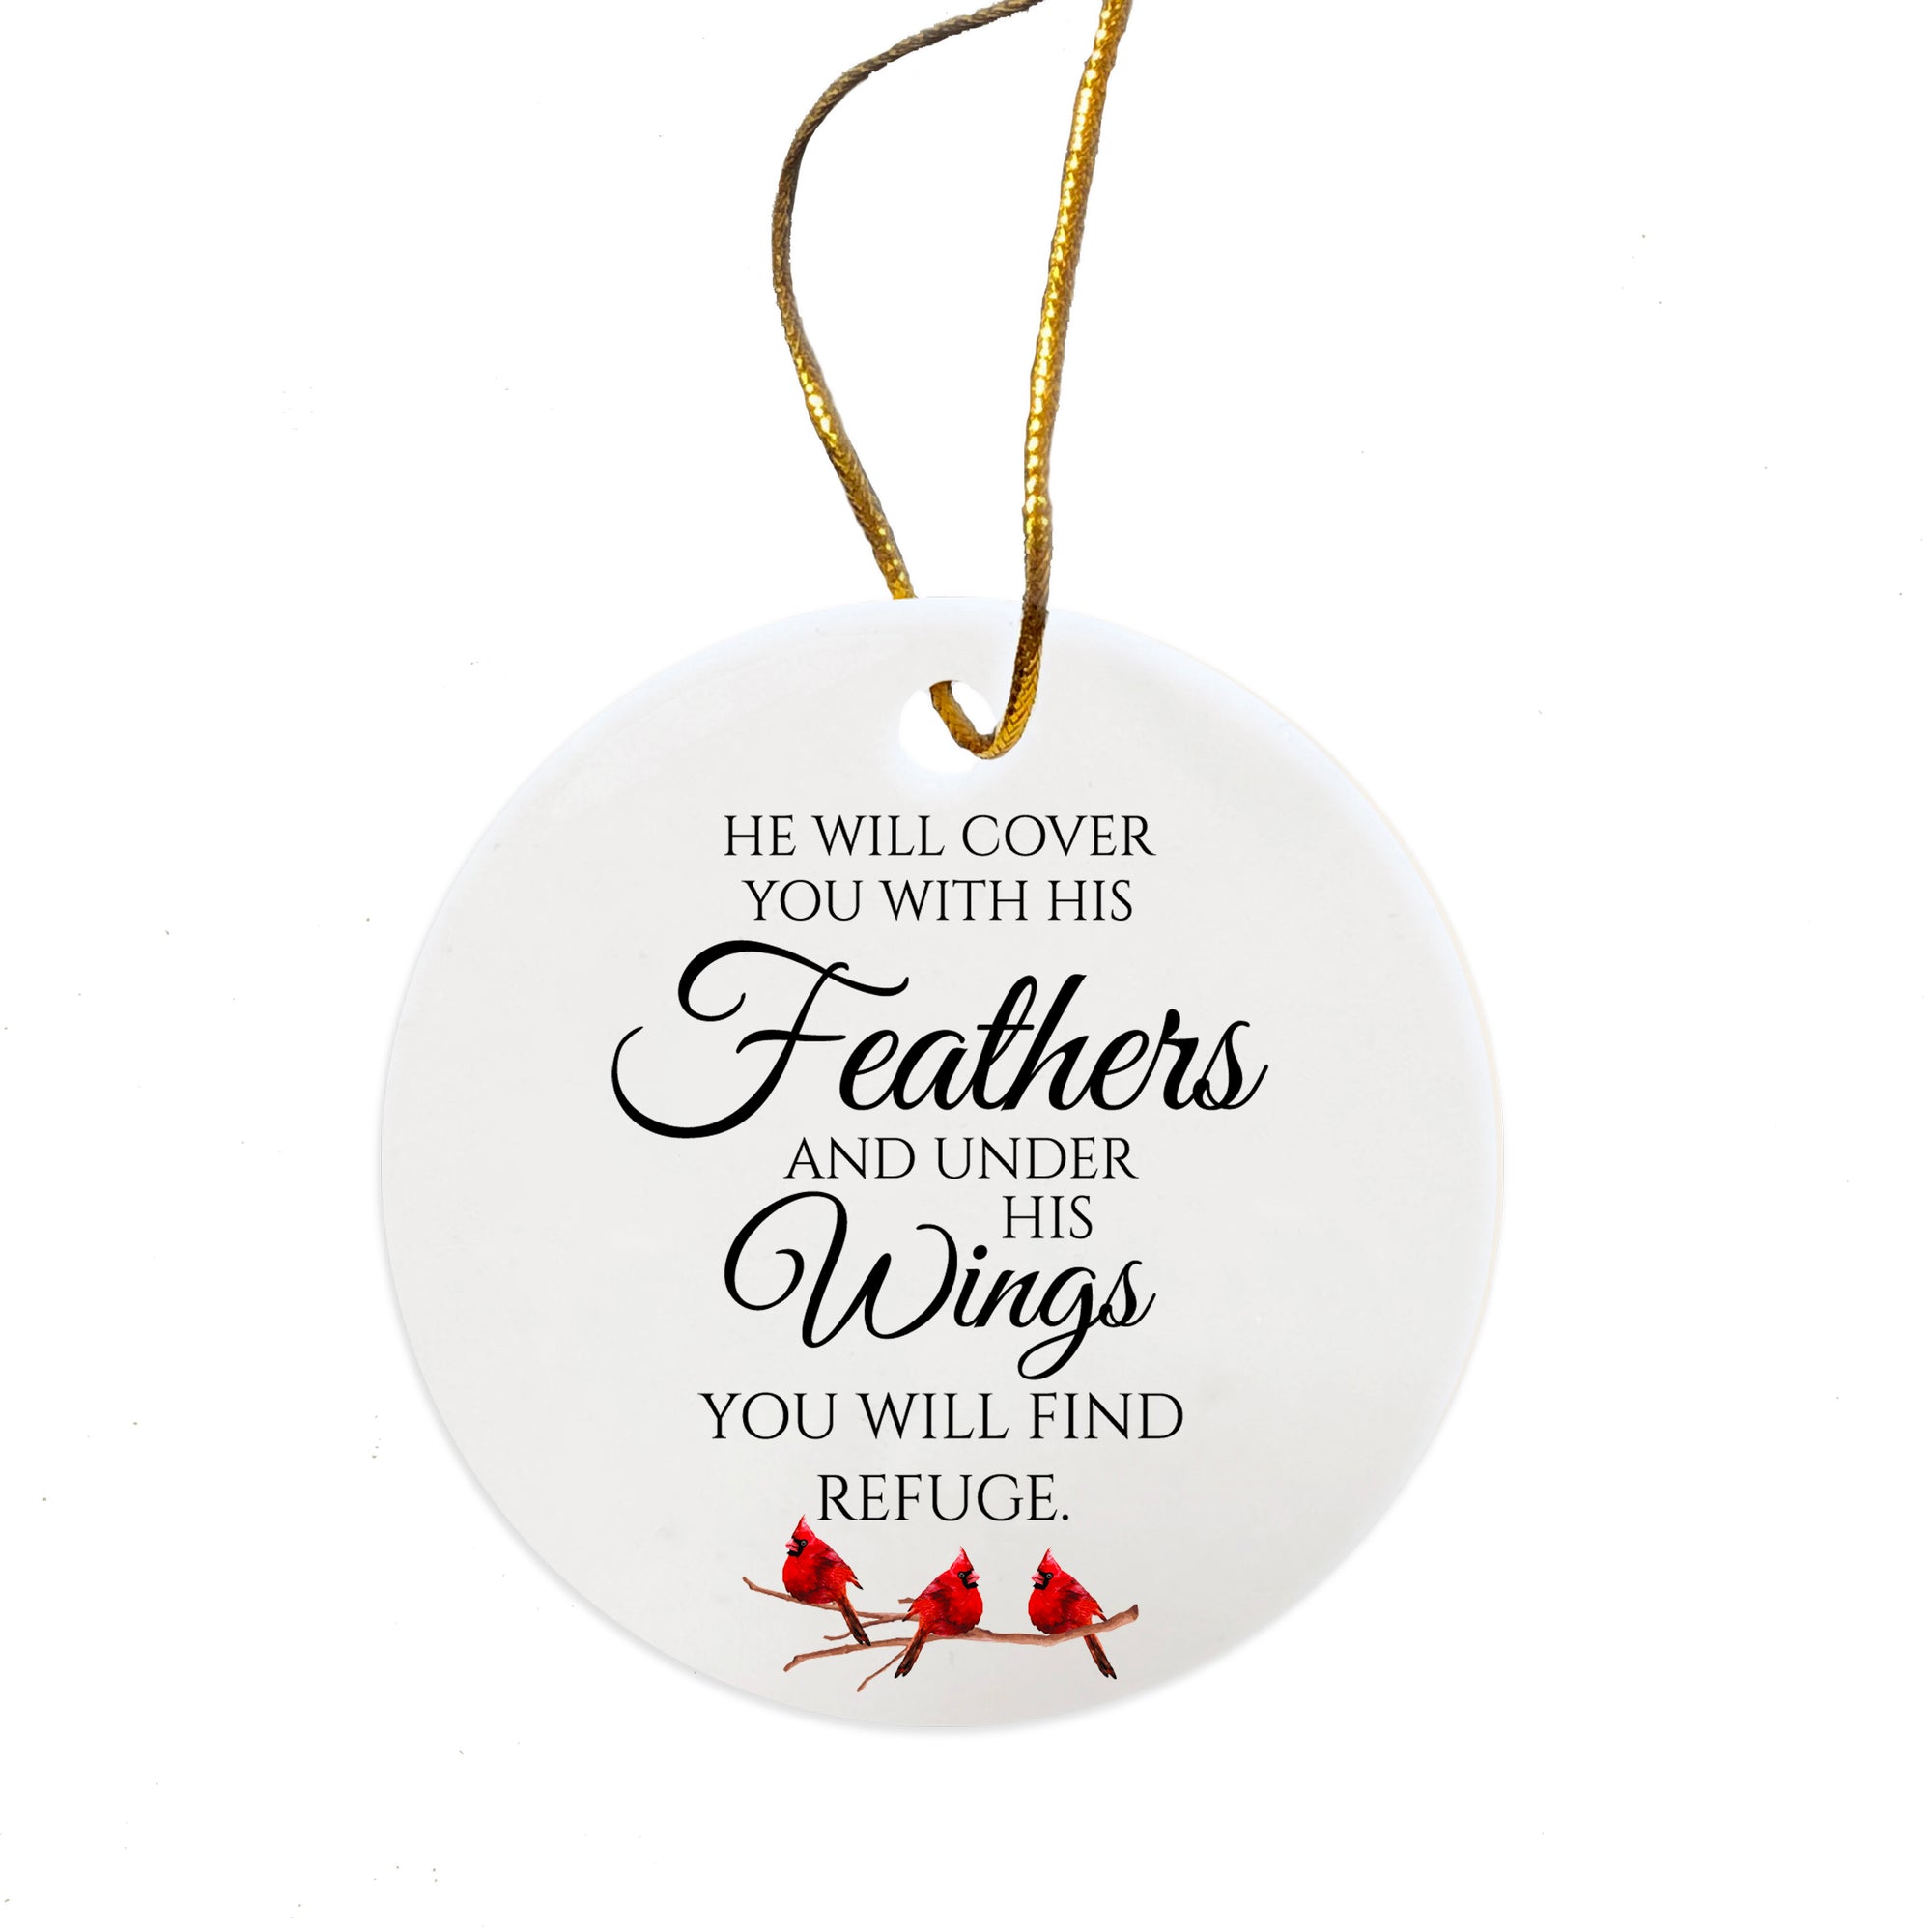 White Ceramic Cardinal Ornament With Everyday Verses Gift Ideas - He Will Cover